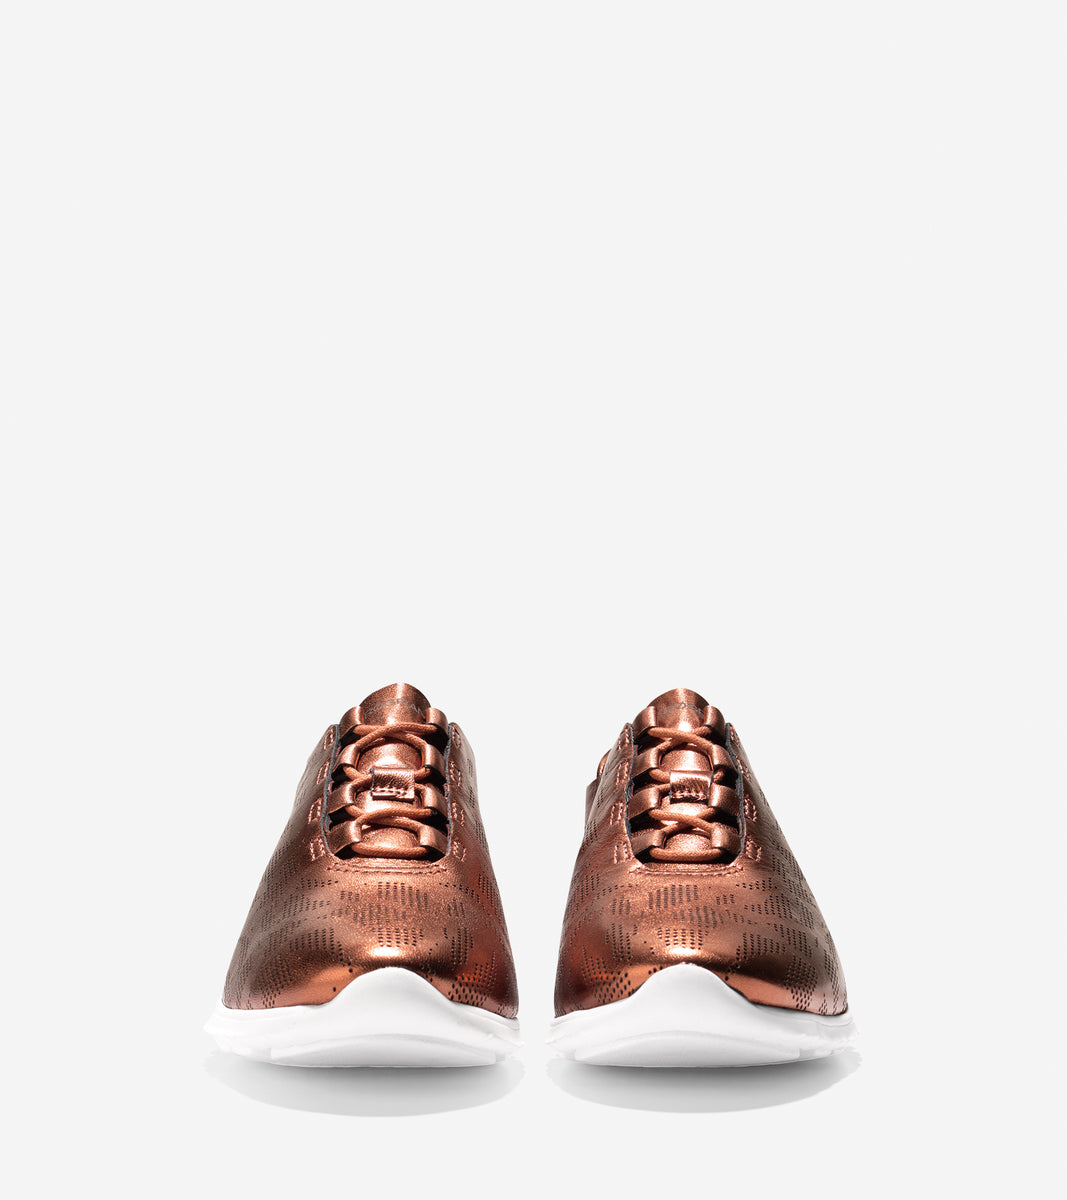 ColeHaan-ZERØGRAND Perforated Trainer-w04243-Deep Copper Perf Leather-optic White